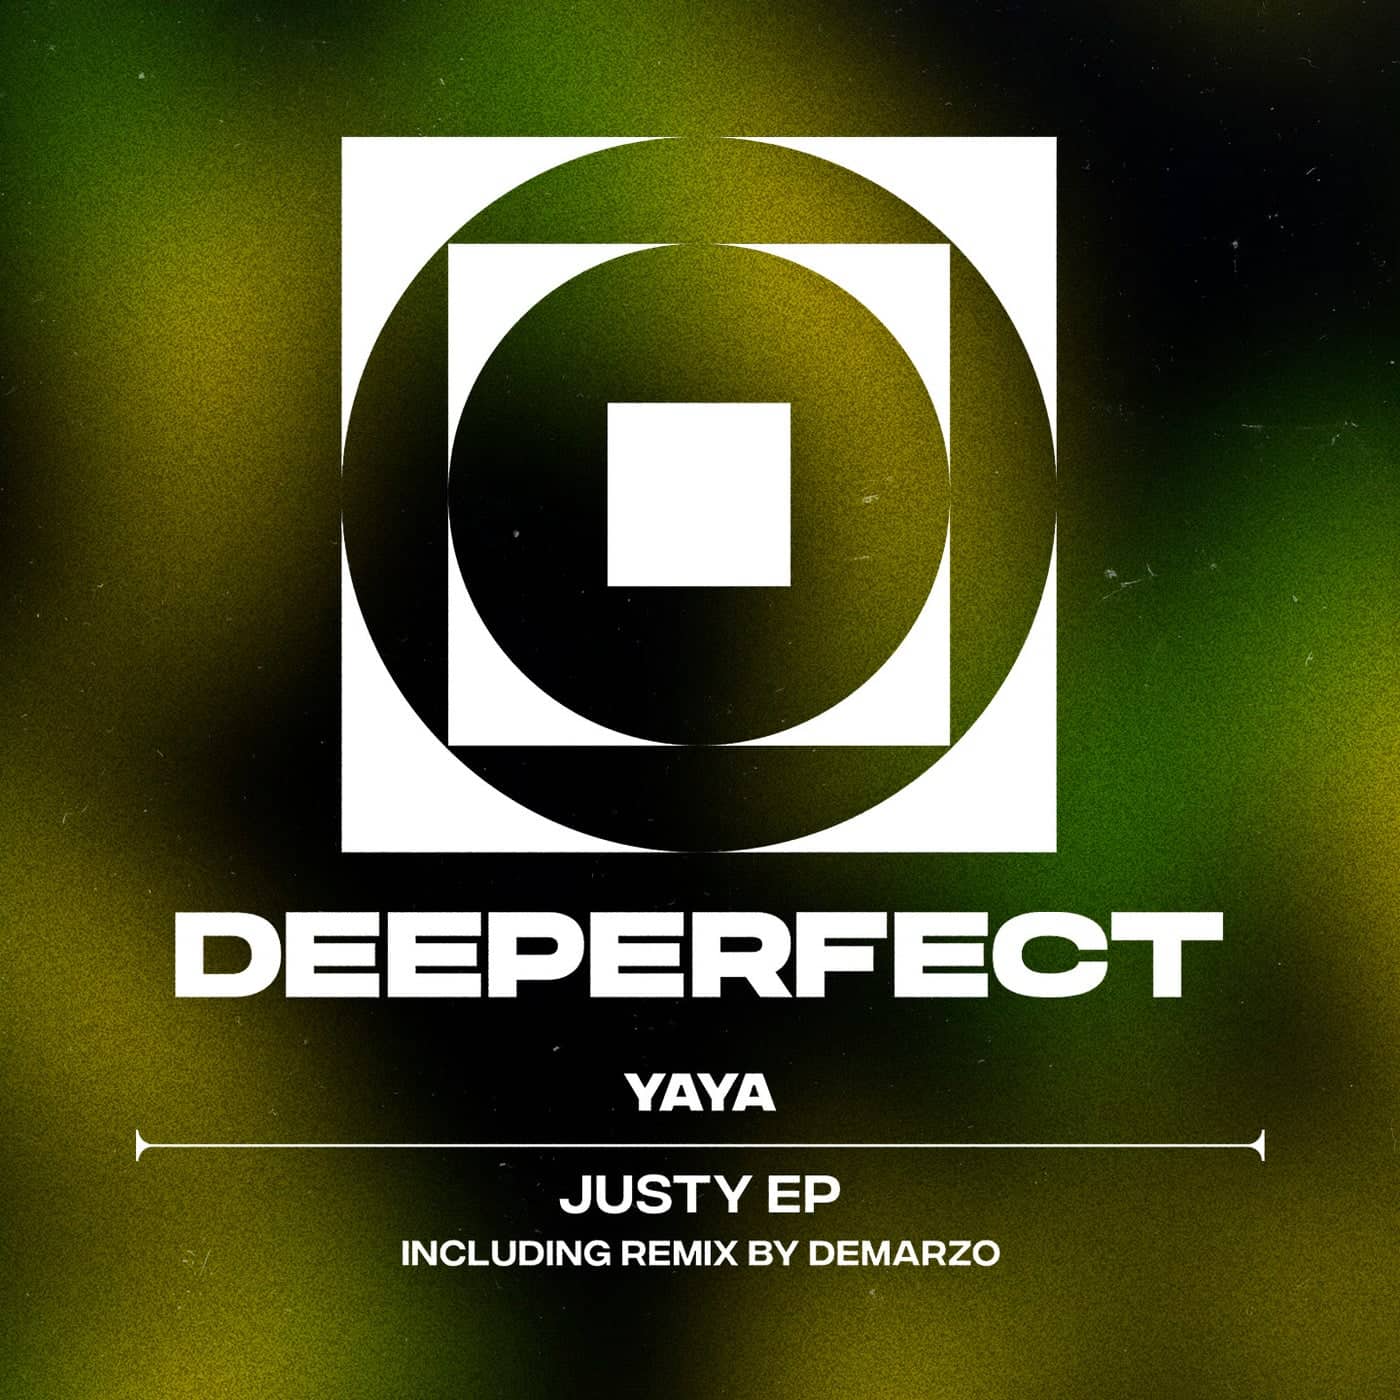 image cover: Justy EP by Yaya on Deeperfect